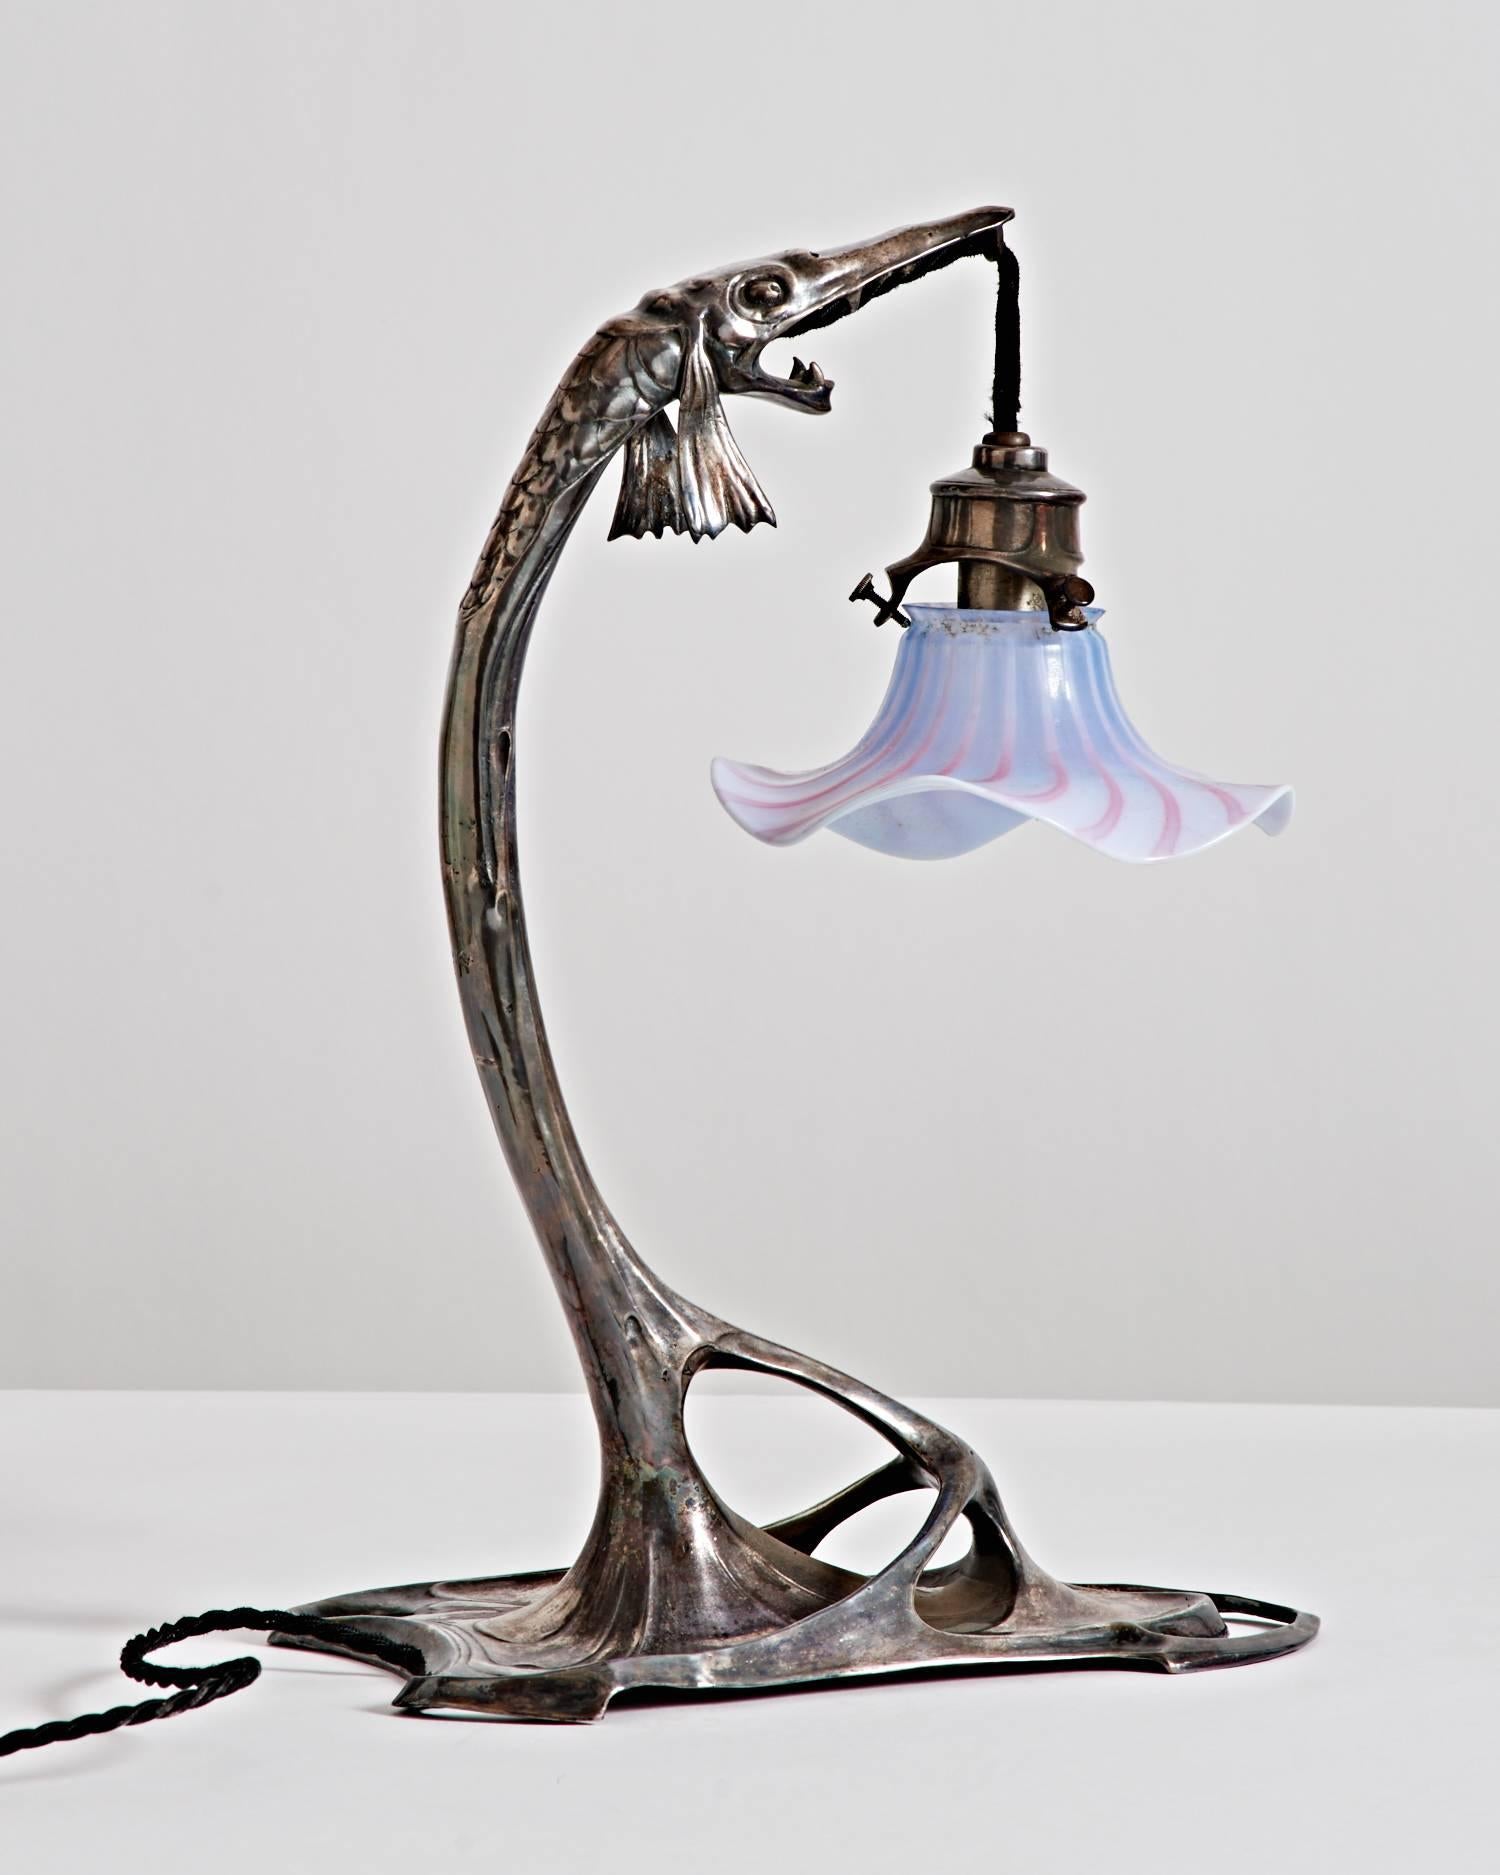 Jugendstil pewter table lamp in the form of a pike fish suspending a floriform glass shade from its mouth.